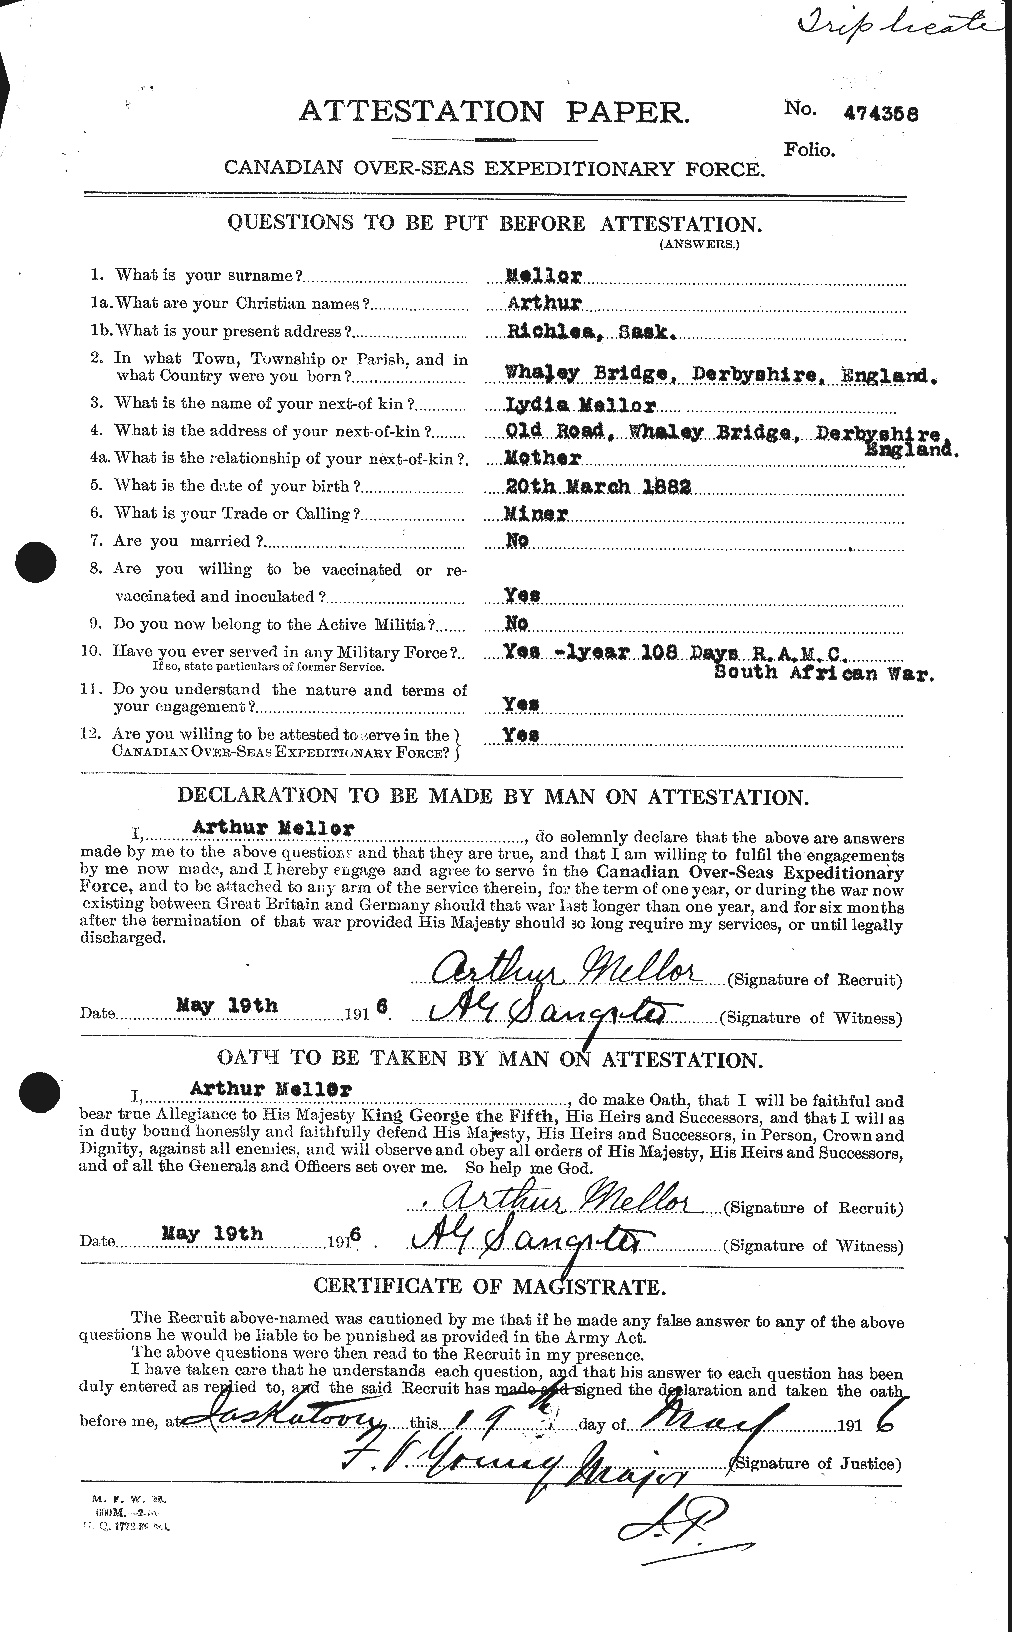 Personnel Records of the First World War - CEF 493789a